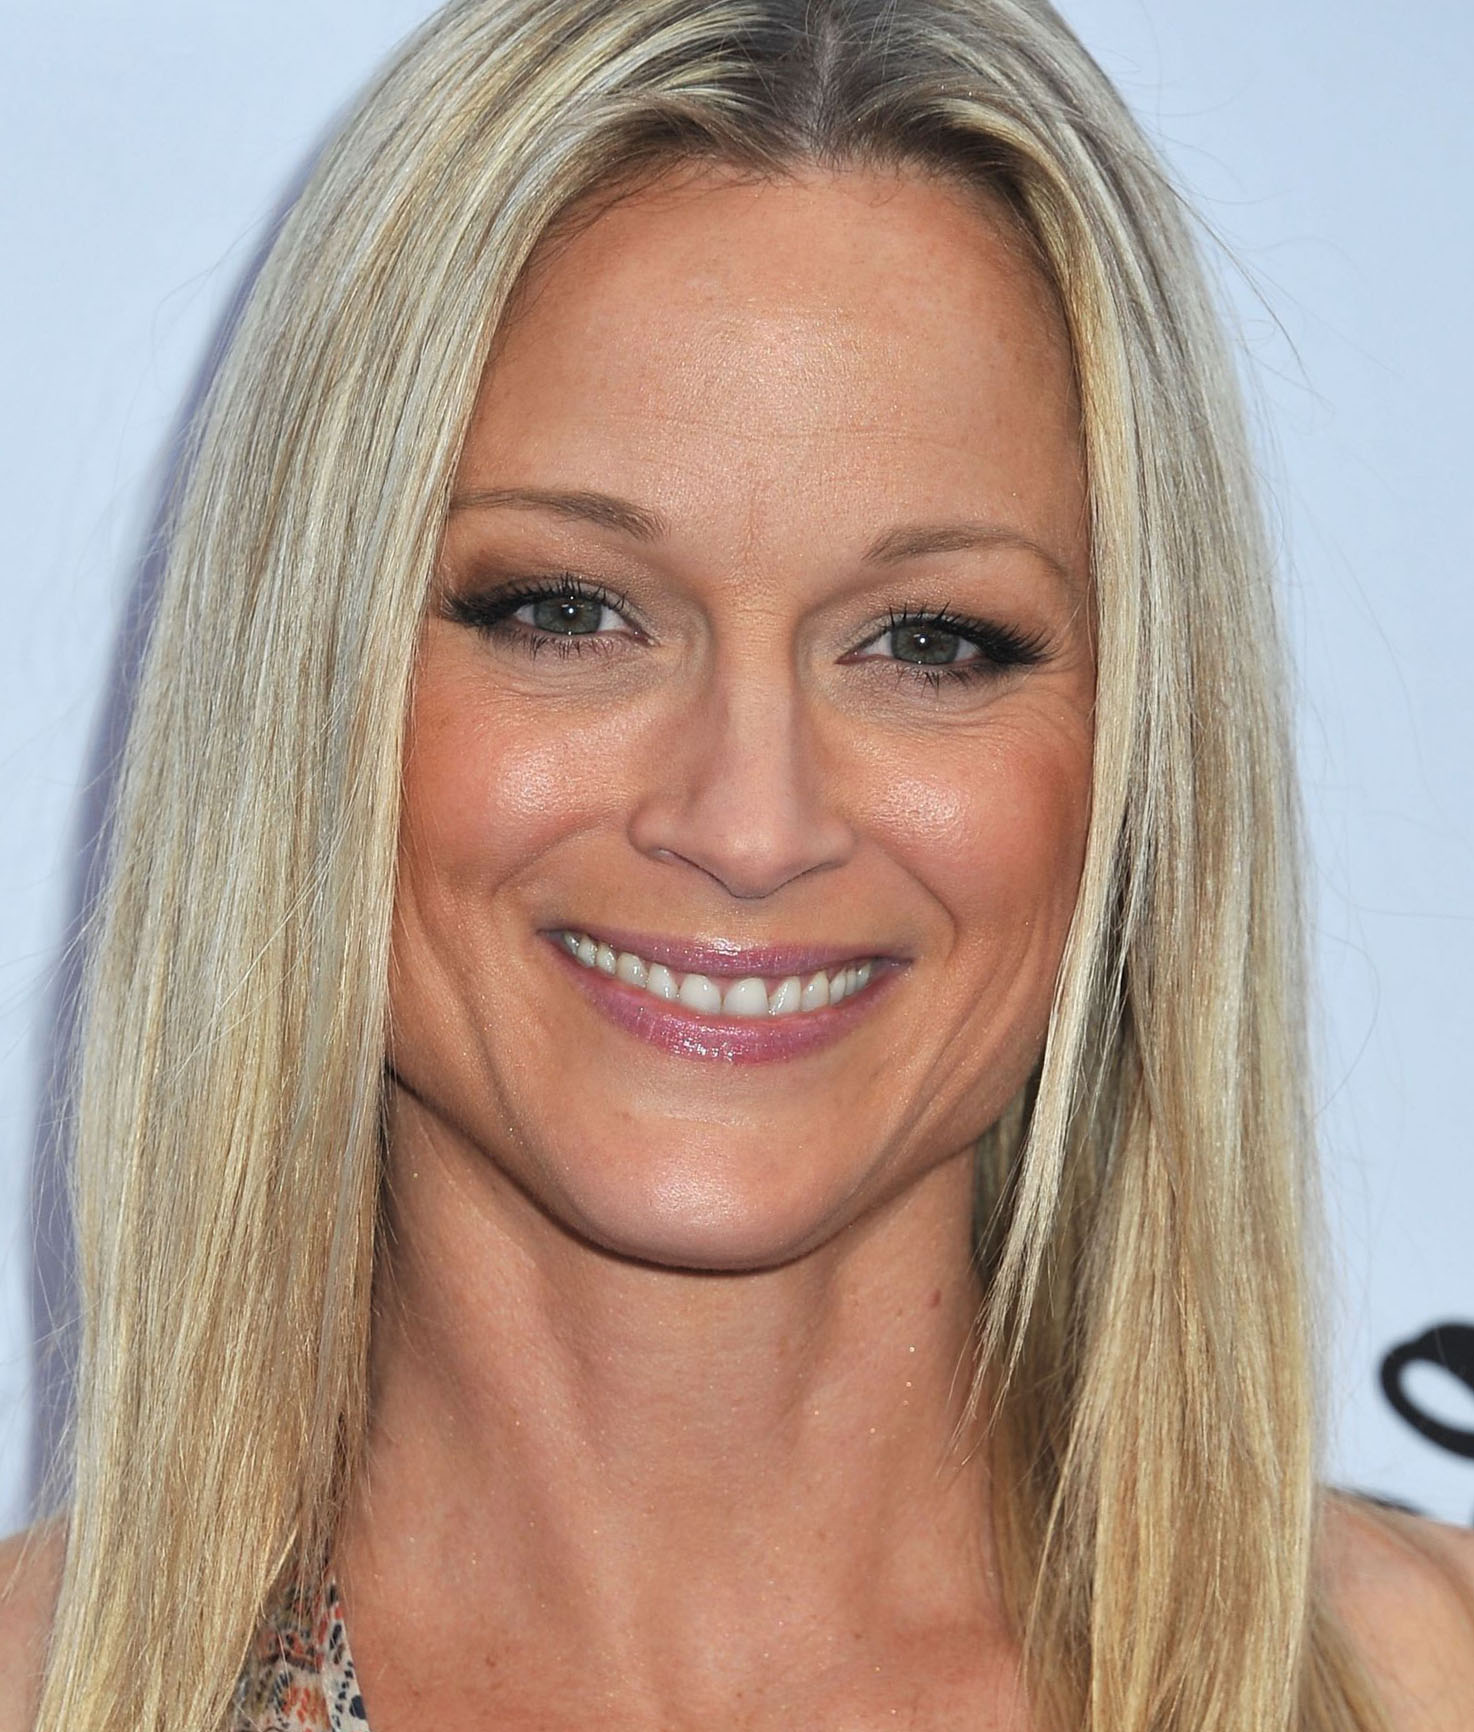 SPITTER! Teri Polo Naked Leaked Photos - Fappening Sauce